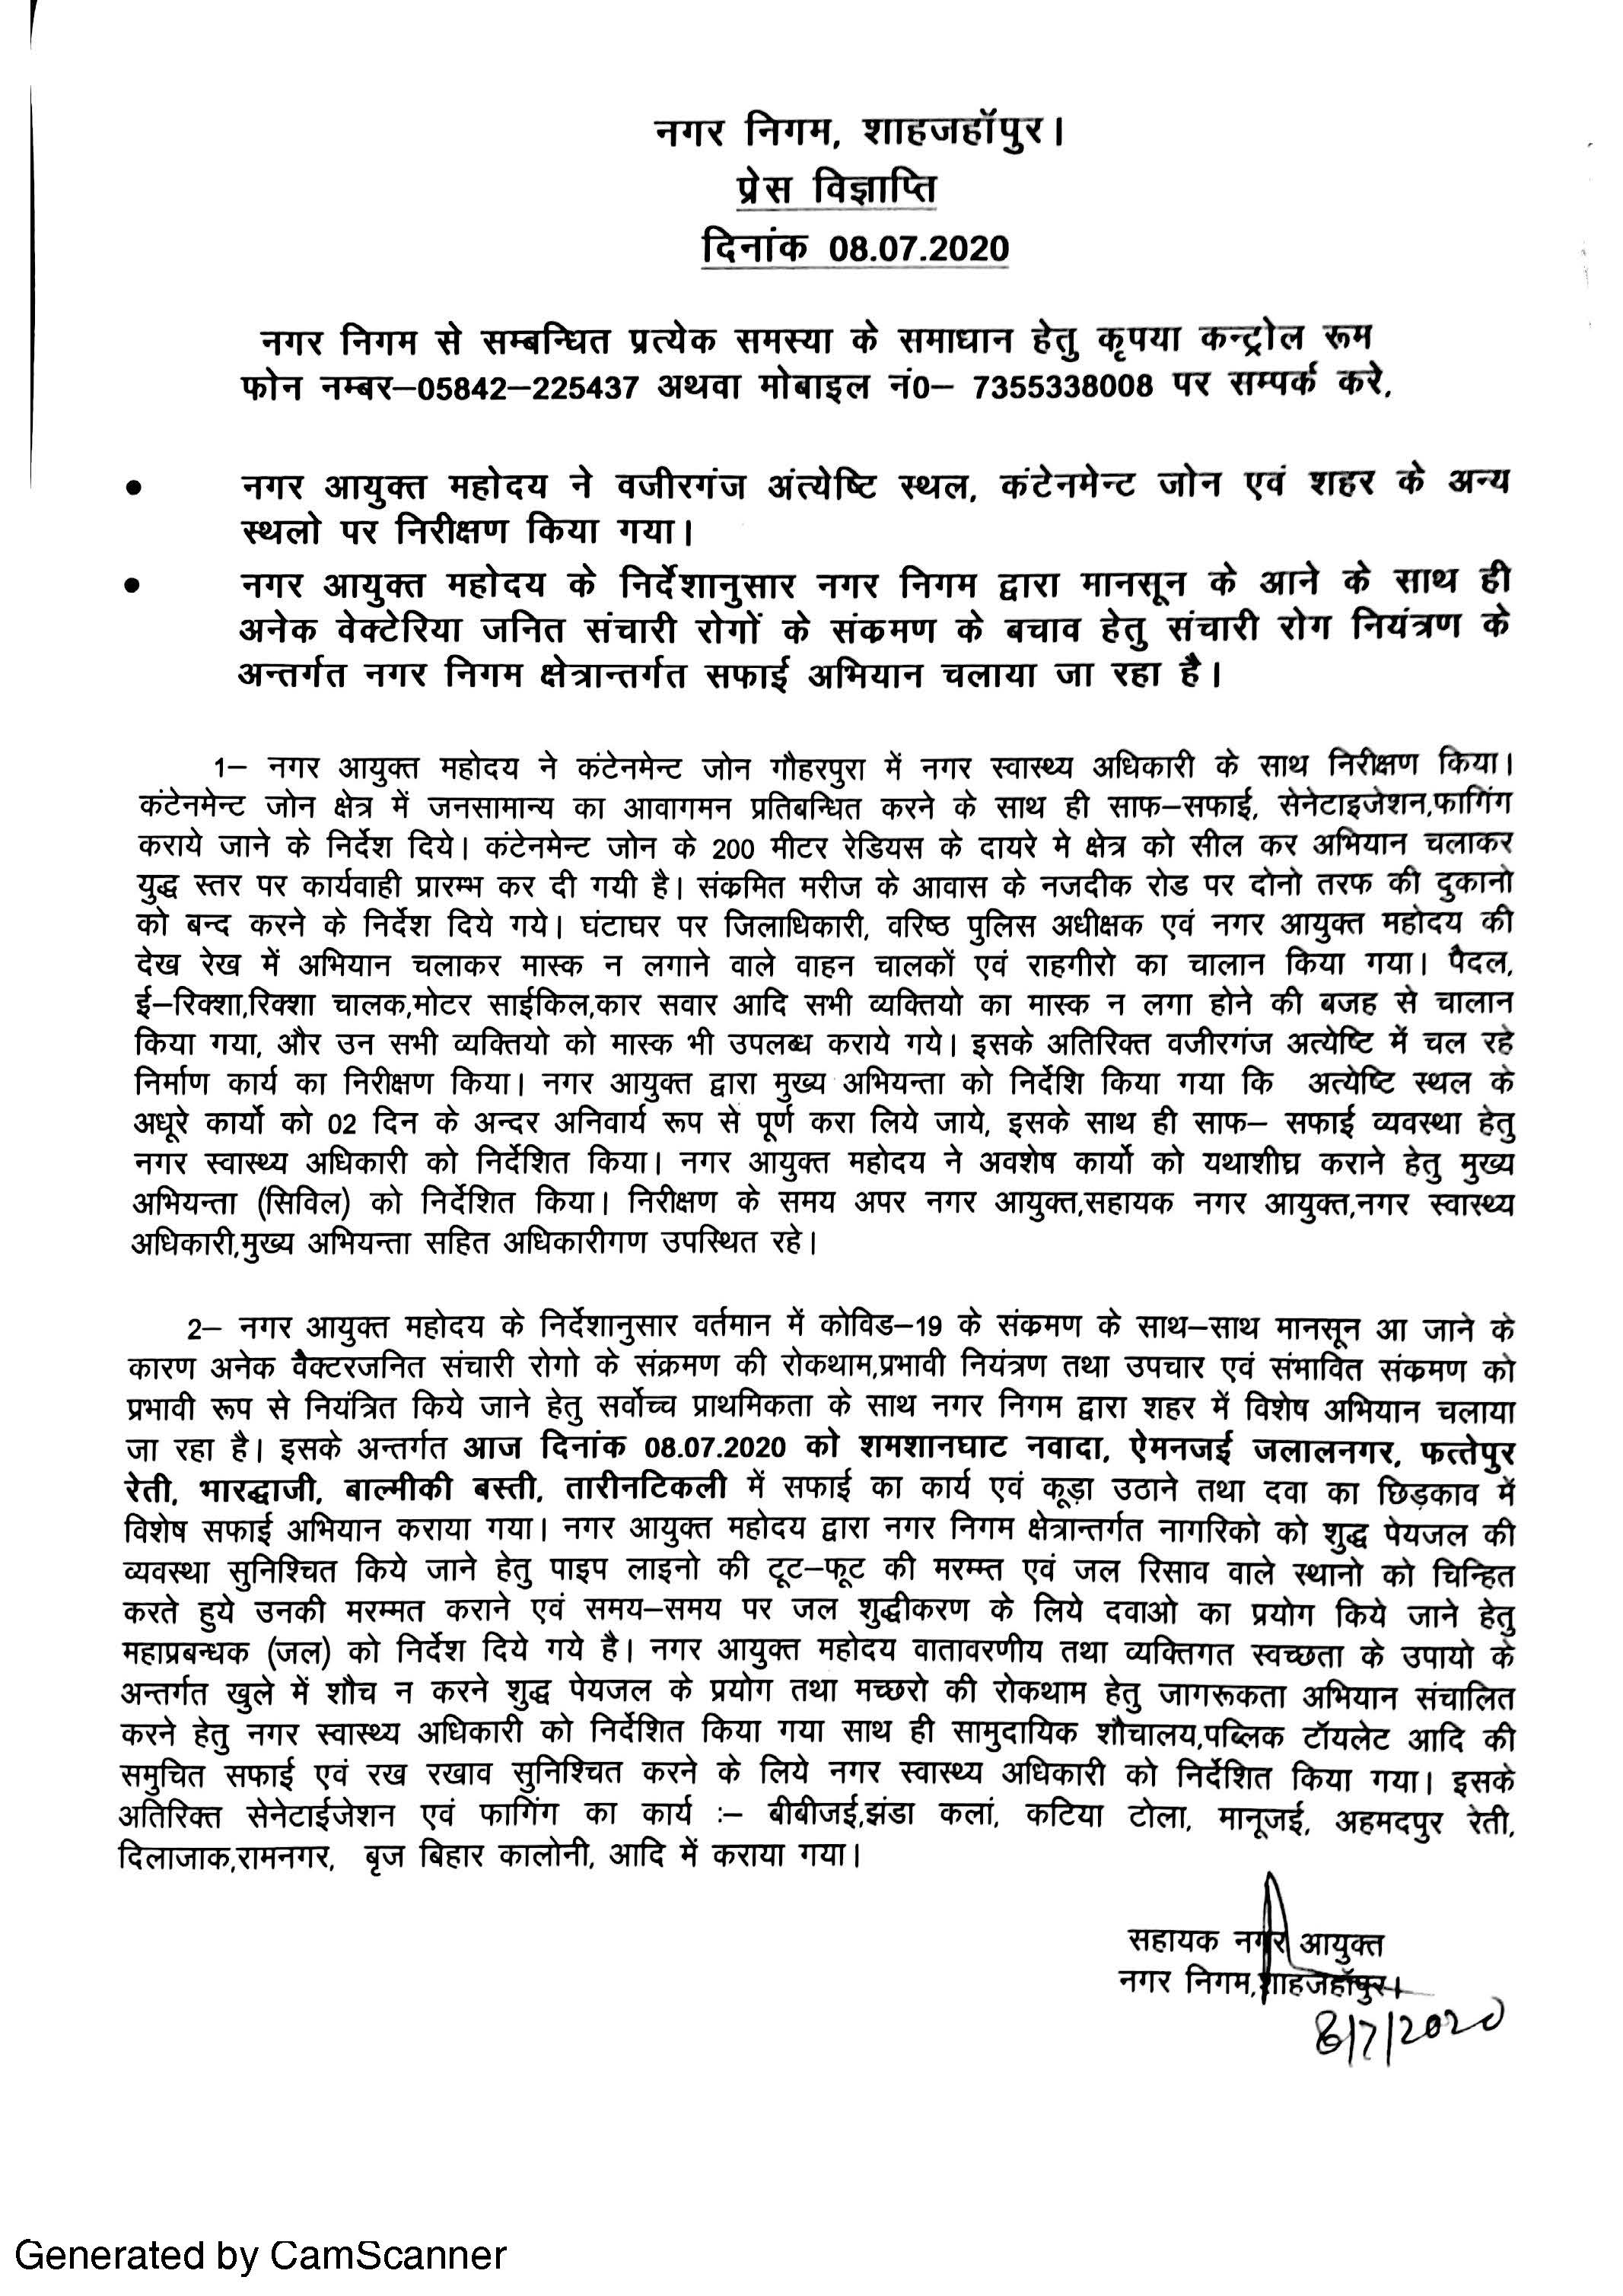 Regarding press release of inspection carried out in containment zones and sanitation works carried out in the city on 08/07/2020 as per guidelines of Municipal Commissioner